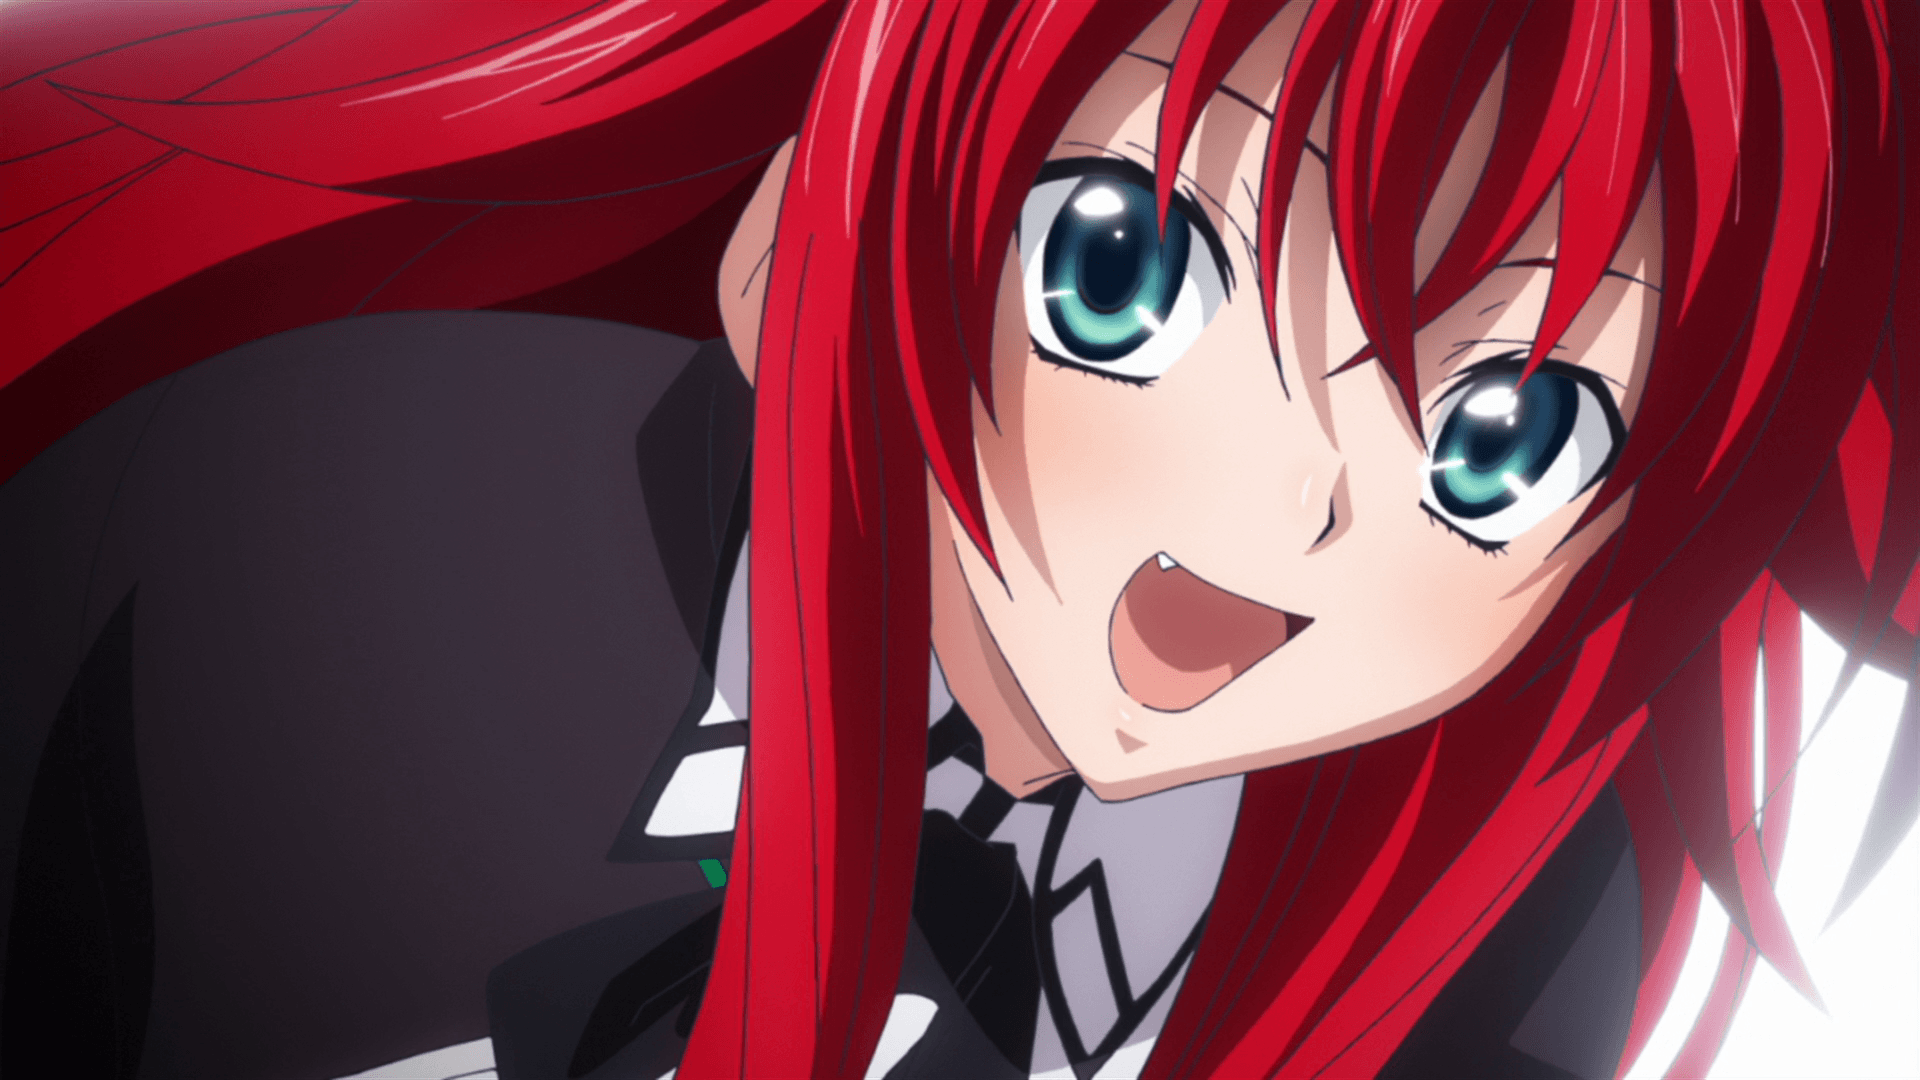 What are your feelings towards Rias Gremory? Gremory